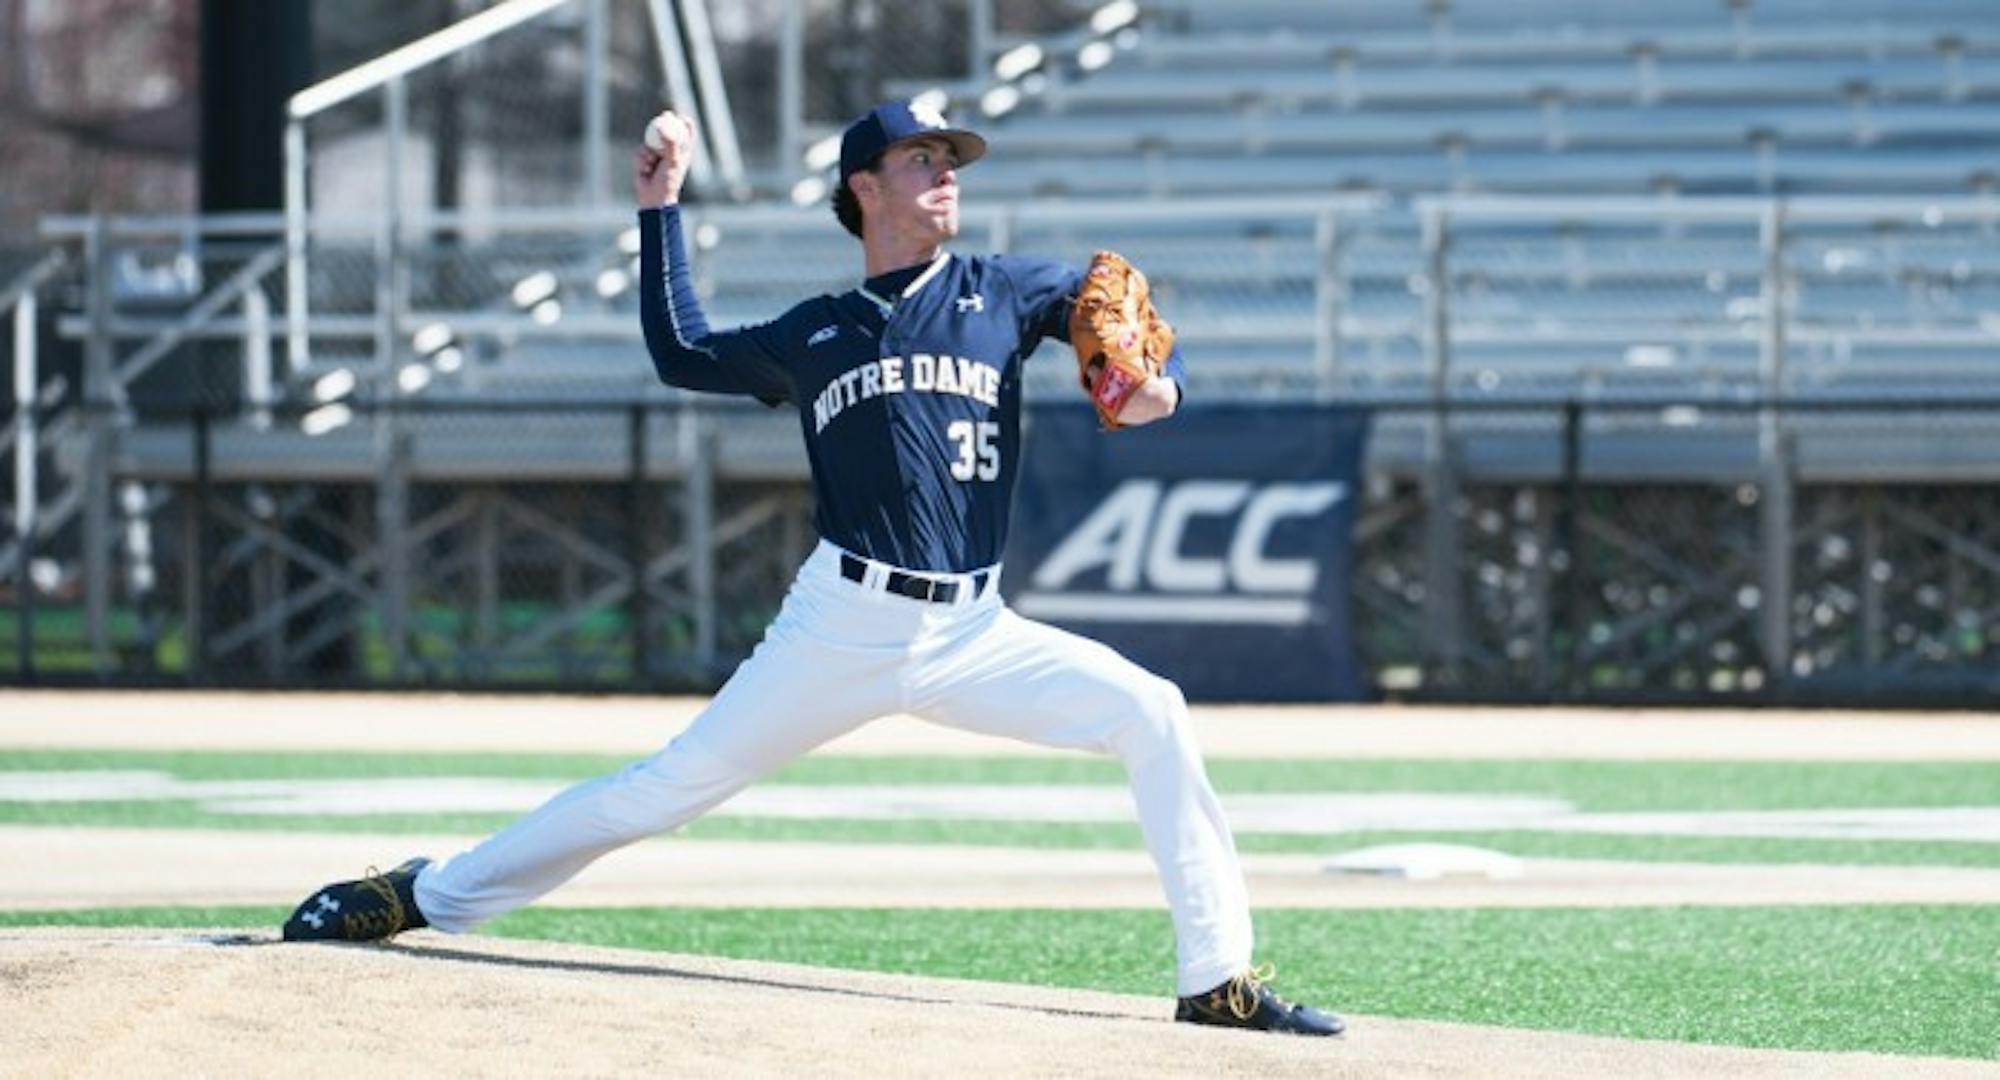 Junior pitcher Peter Solomon delivers a pitch during Notre Dame’s 10-2 victory over Wake Forest on Sunday at Frank Eck Stadium.